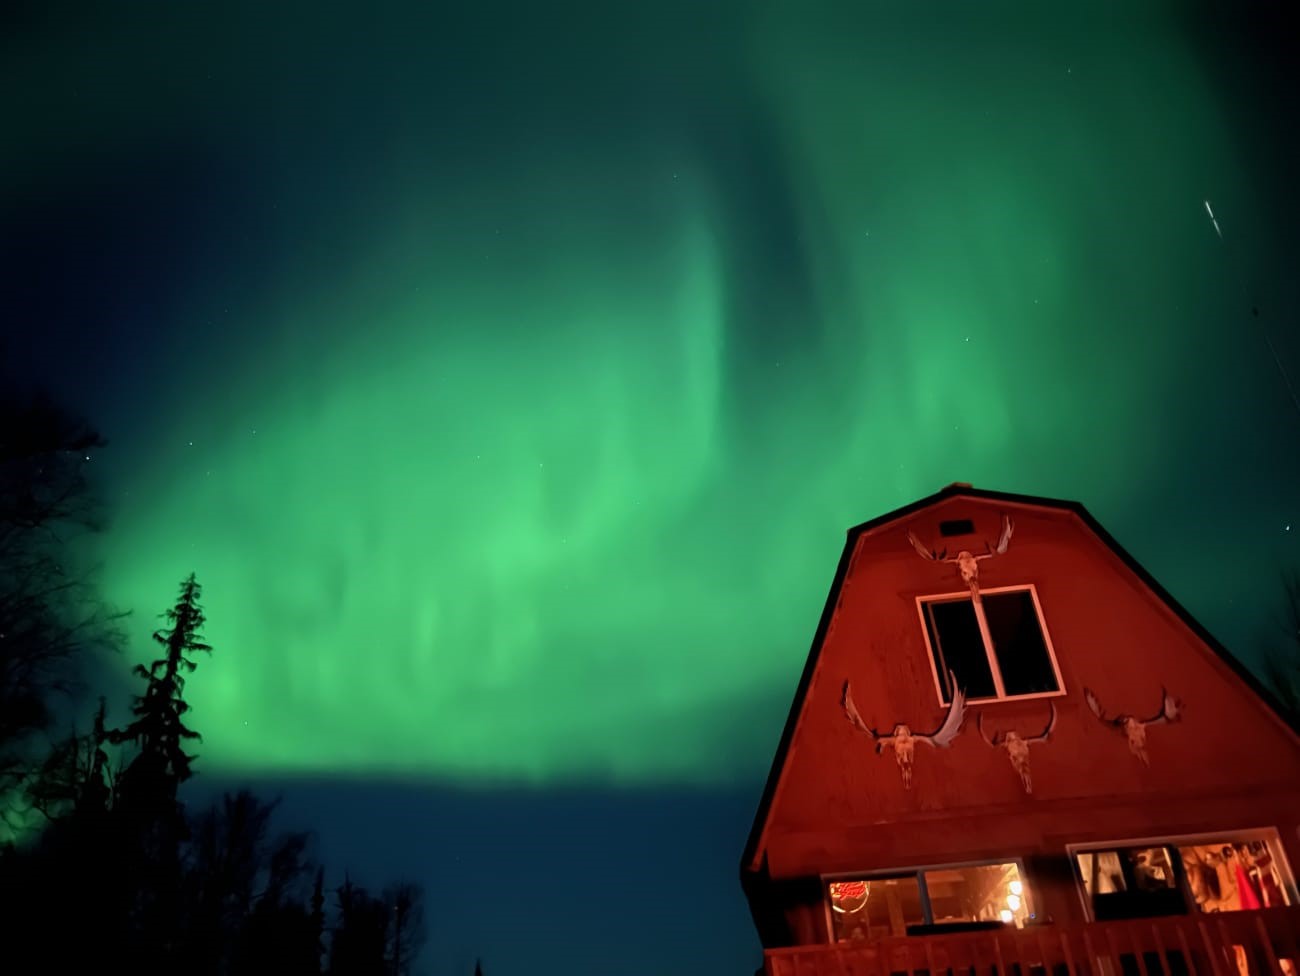 A red barn in front of the Aurora Borealis lighting up the night sky.